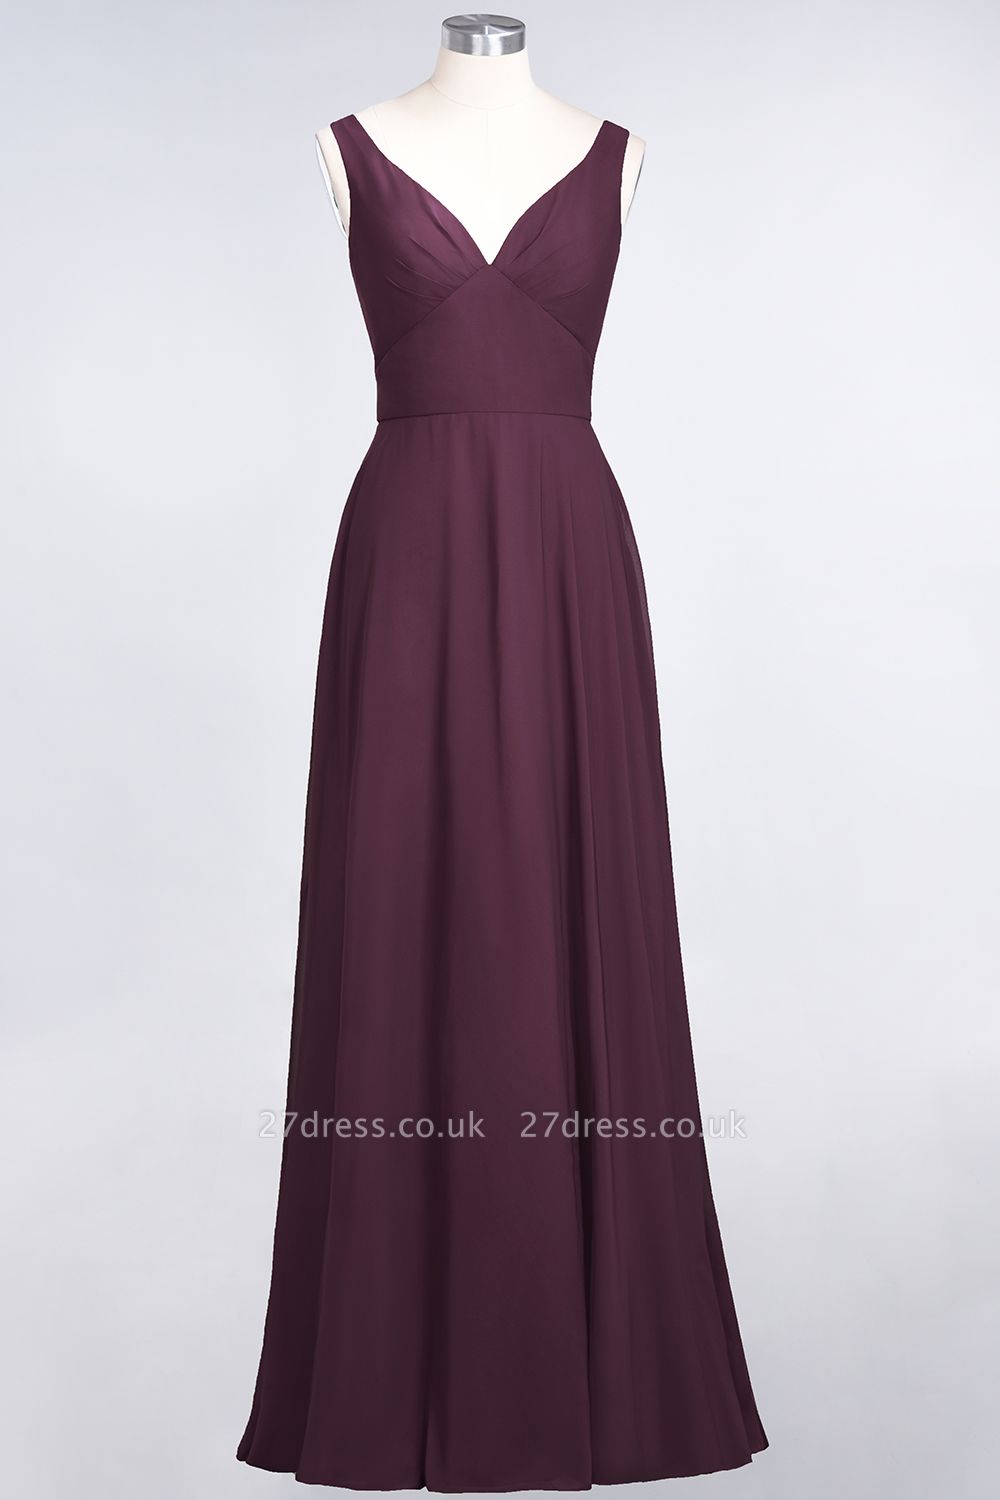 Sexy A-line Flowy Alluring V-neck Straps Sleeveless Ruffles Floor-Length Bridesmaid Dress UK UK with Open Back